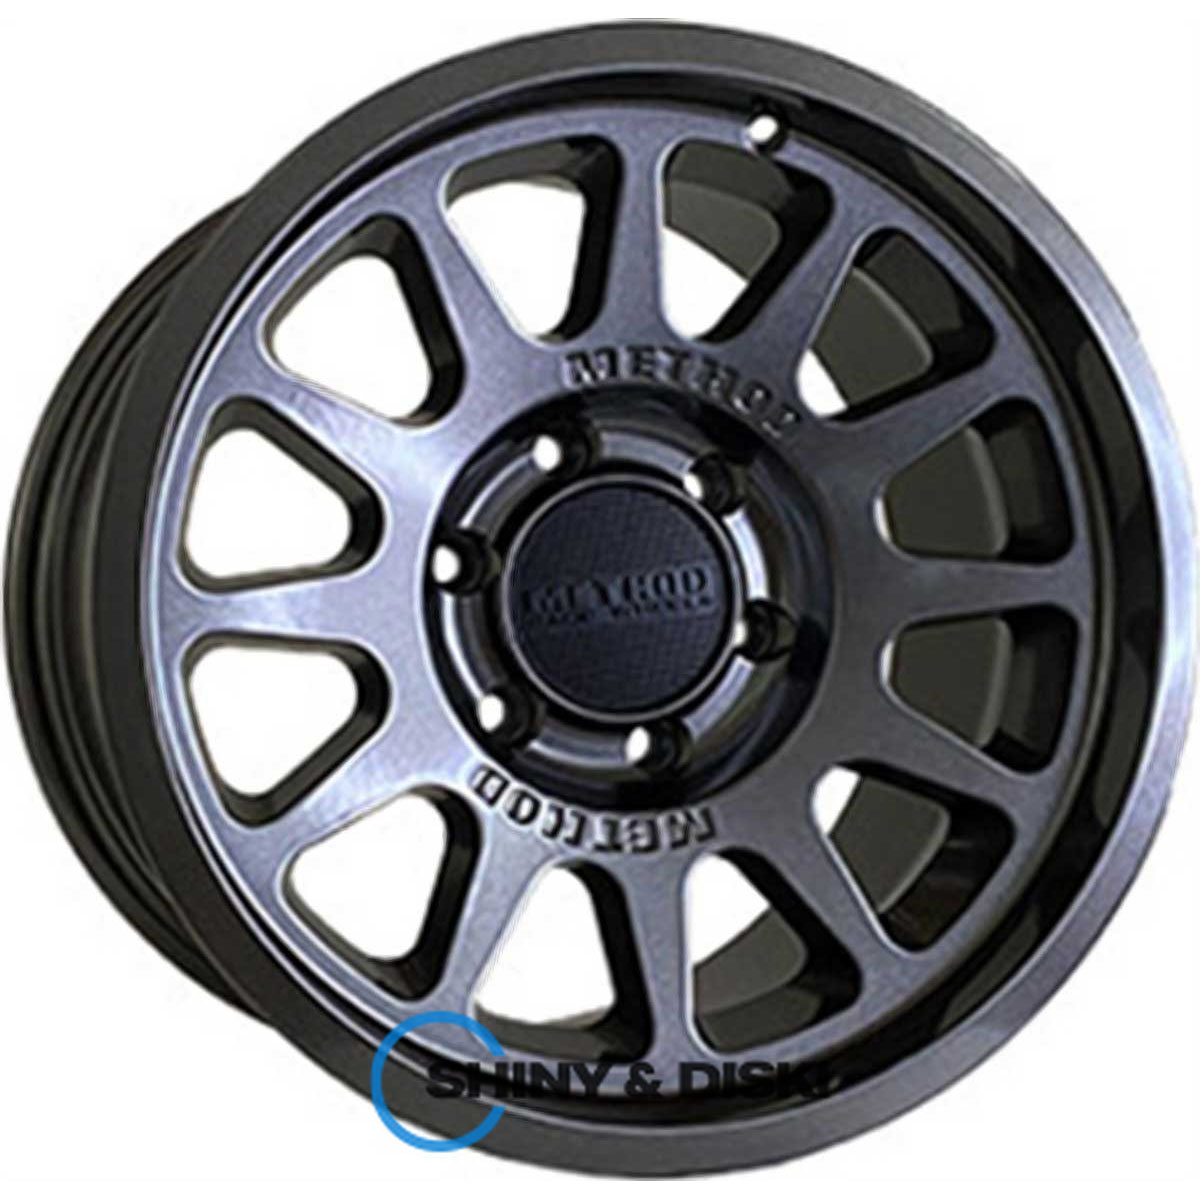 off road wheels ow703 hb